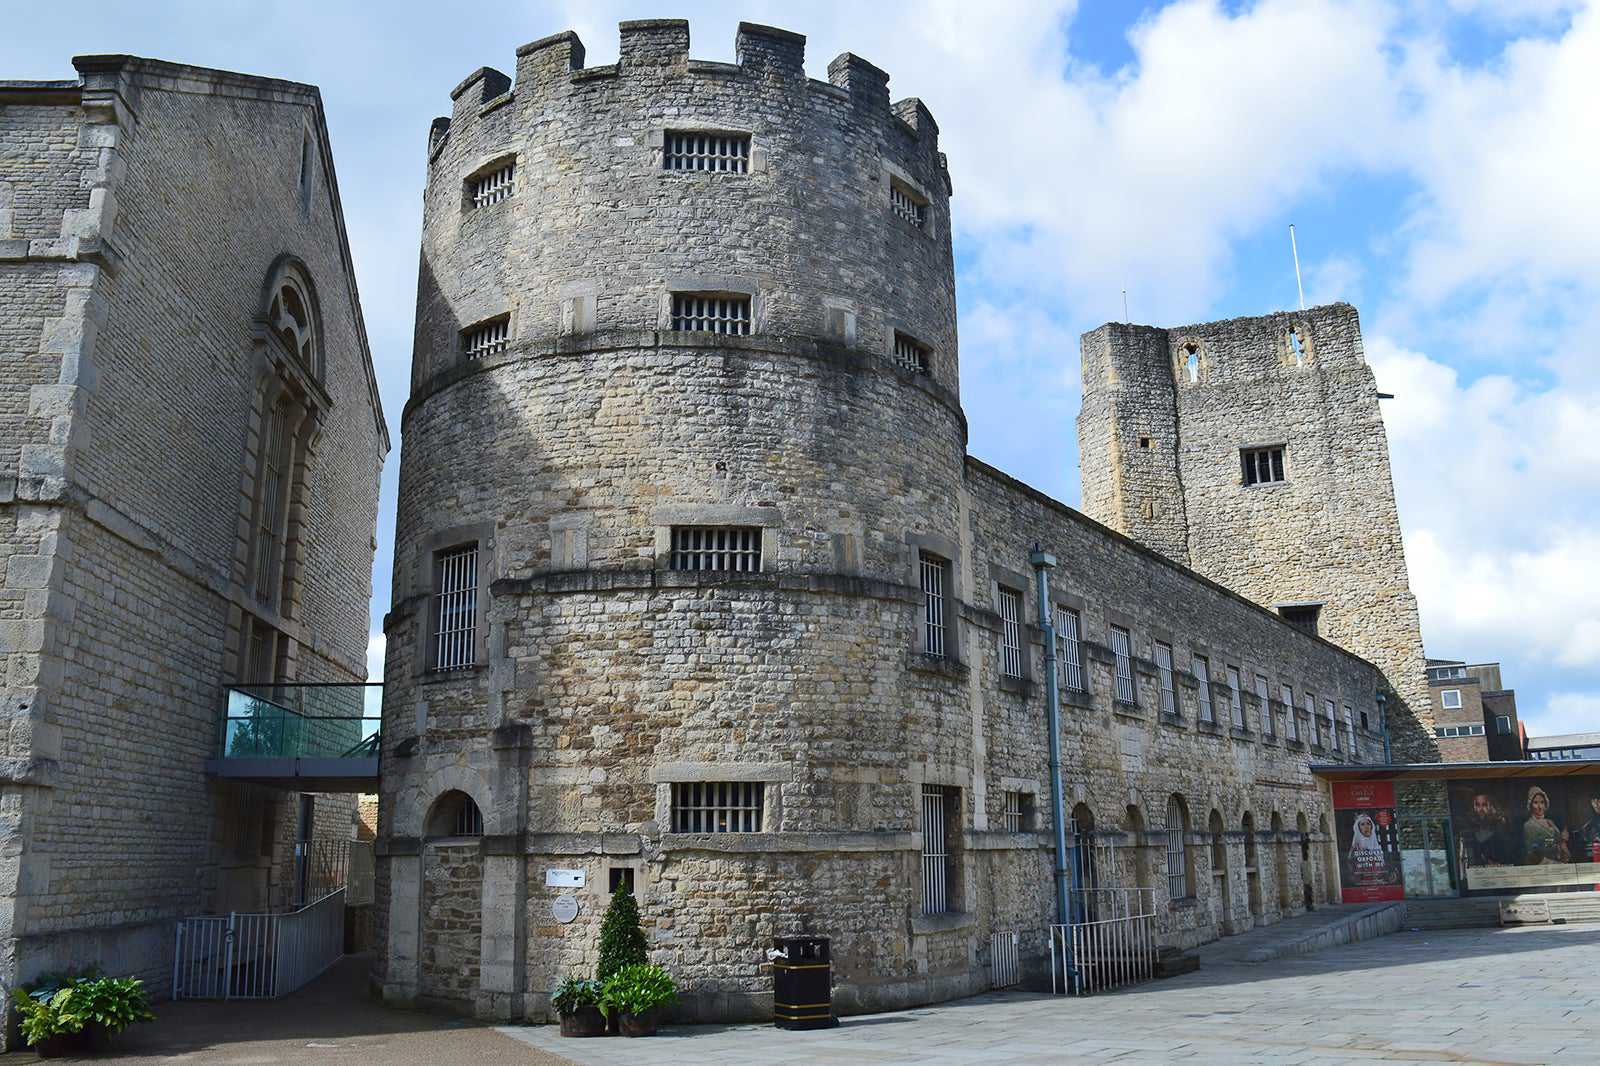 things to do in oxford: oxford castle & prison